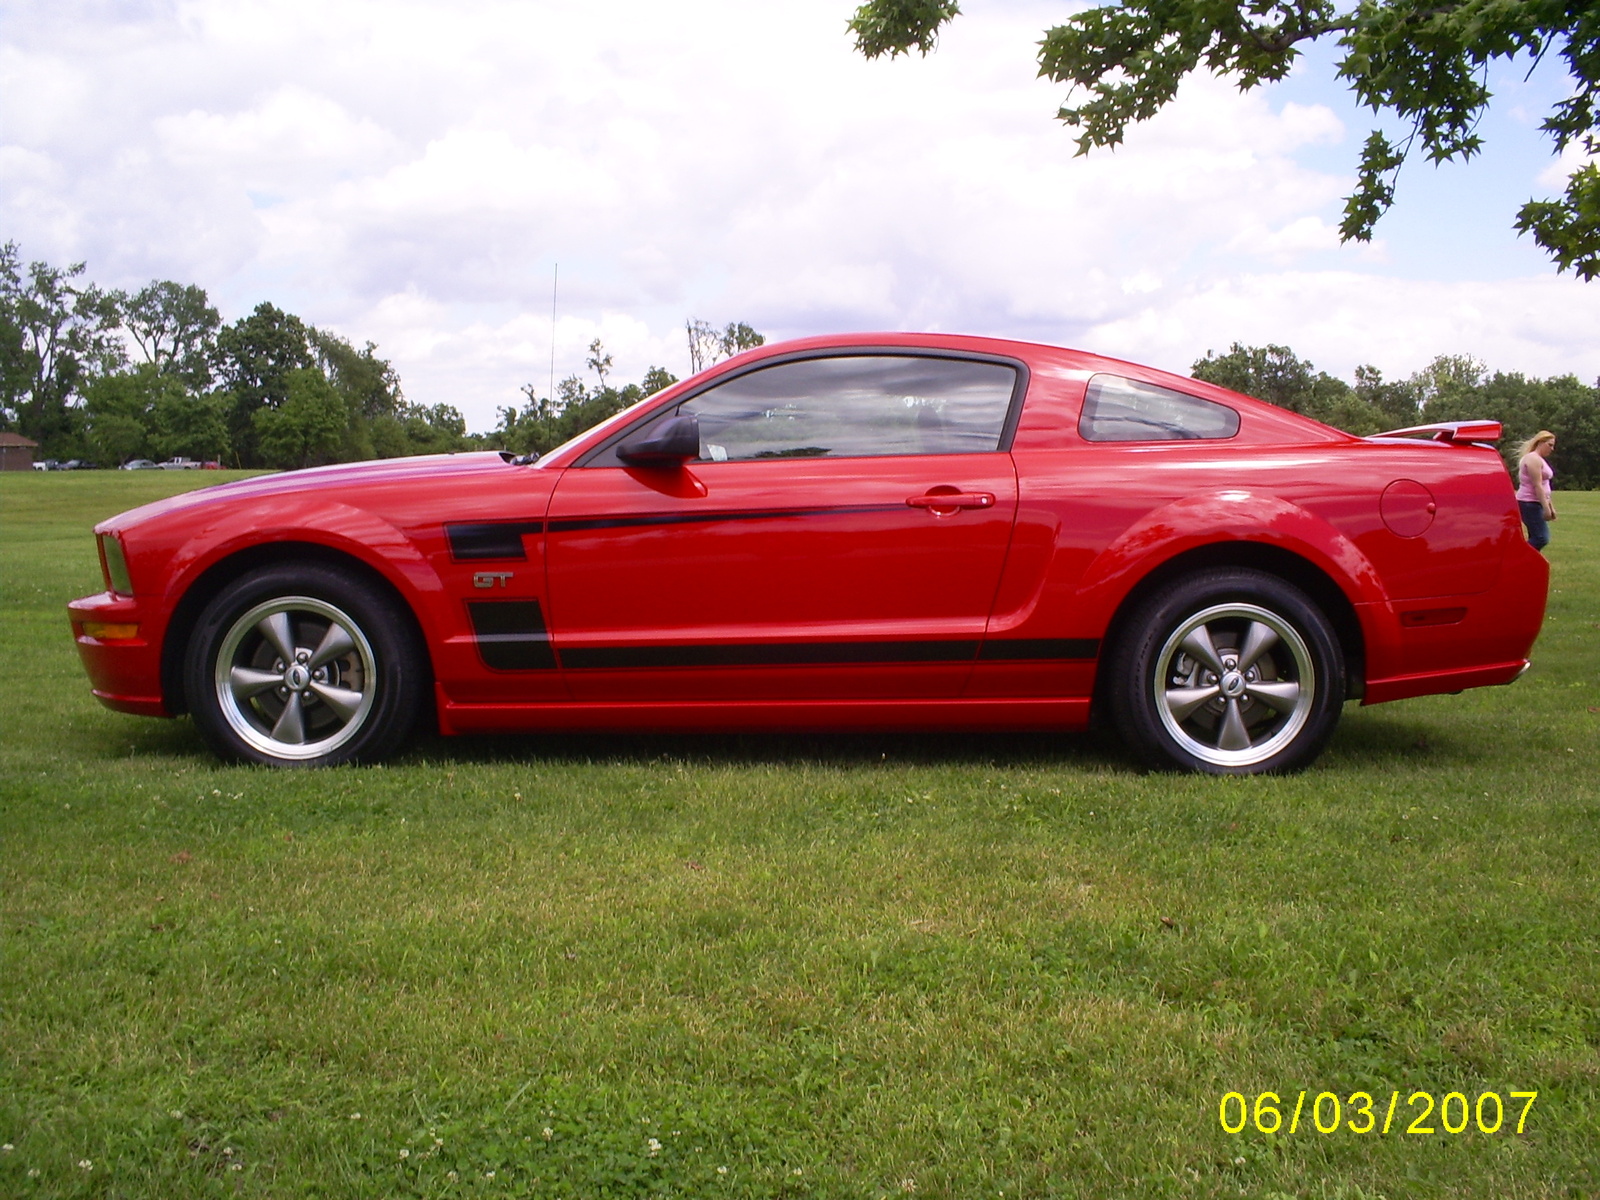 2006 Ford mustang deluxe review #5